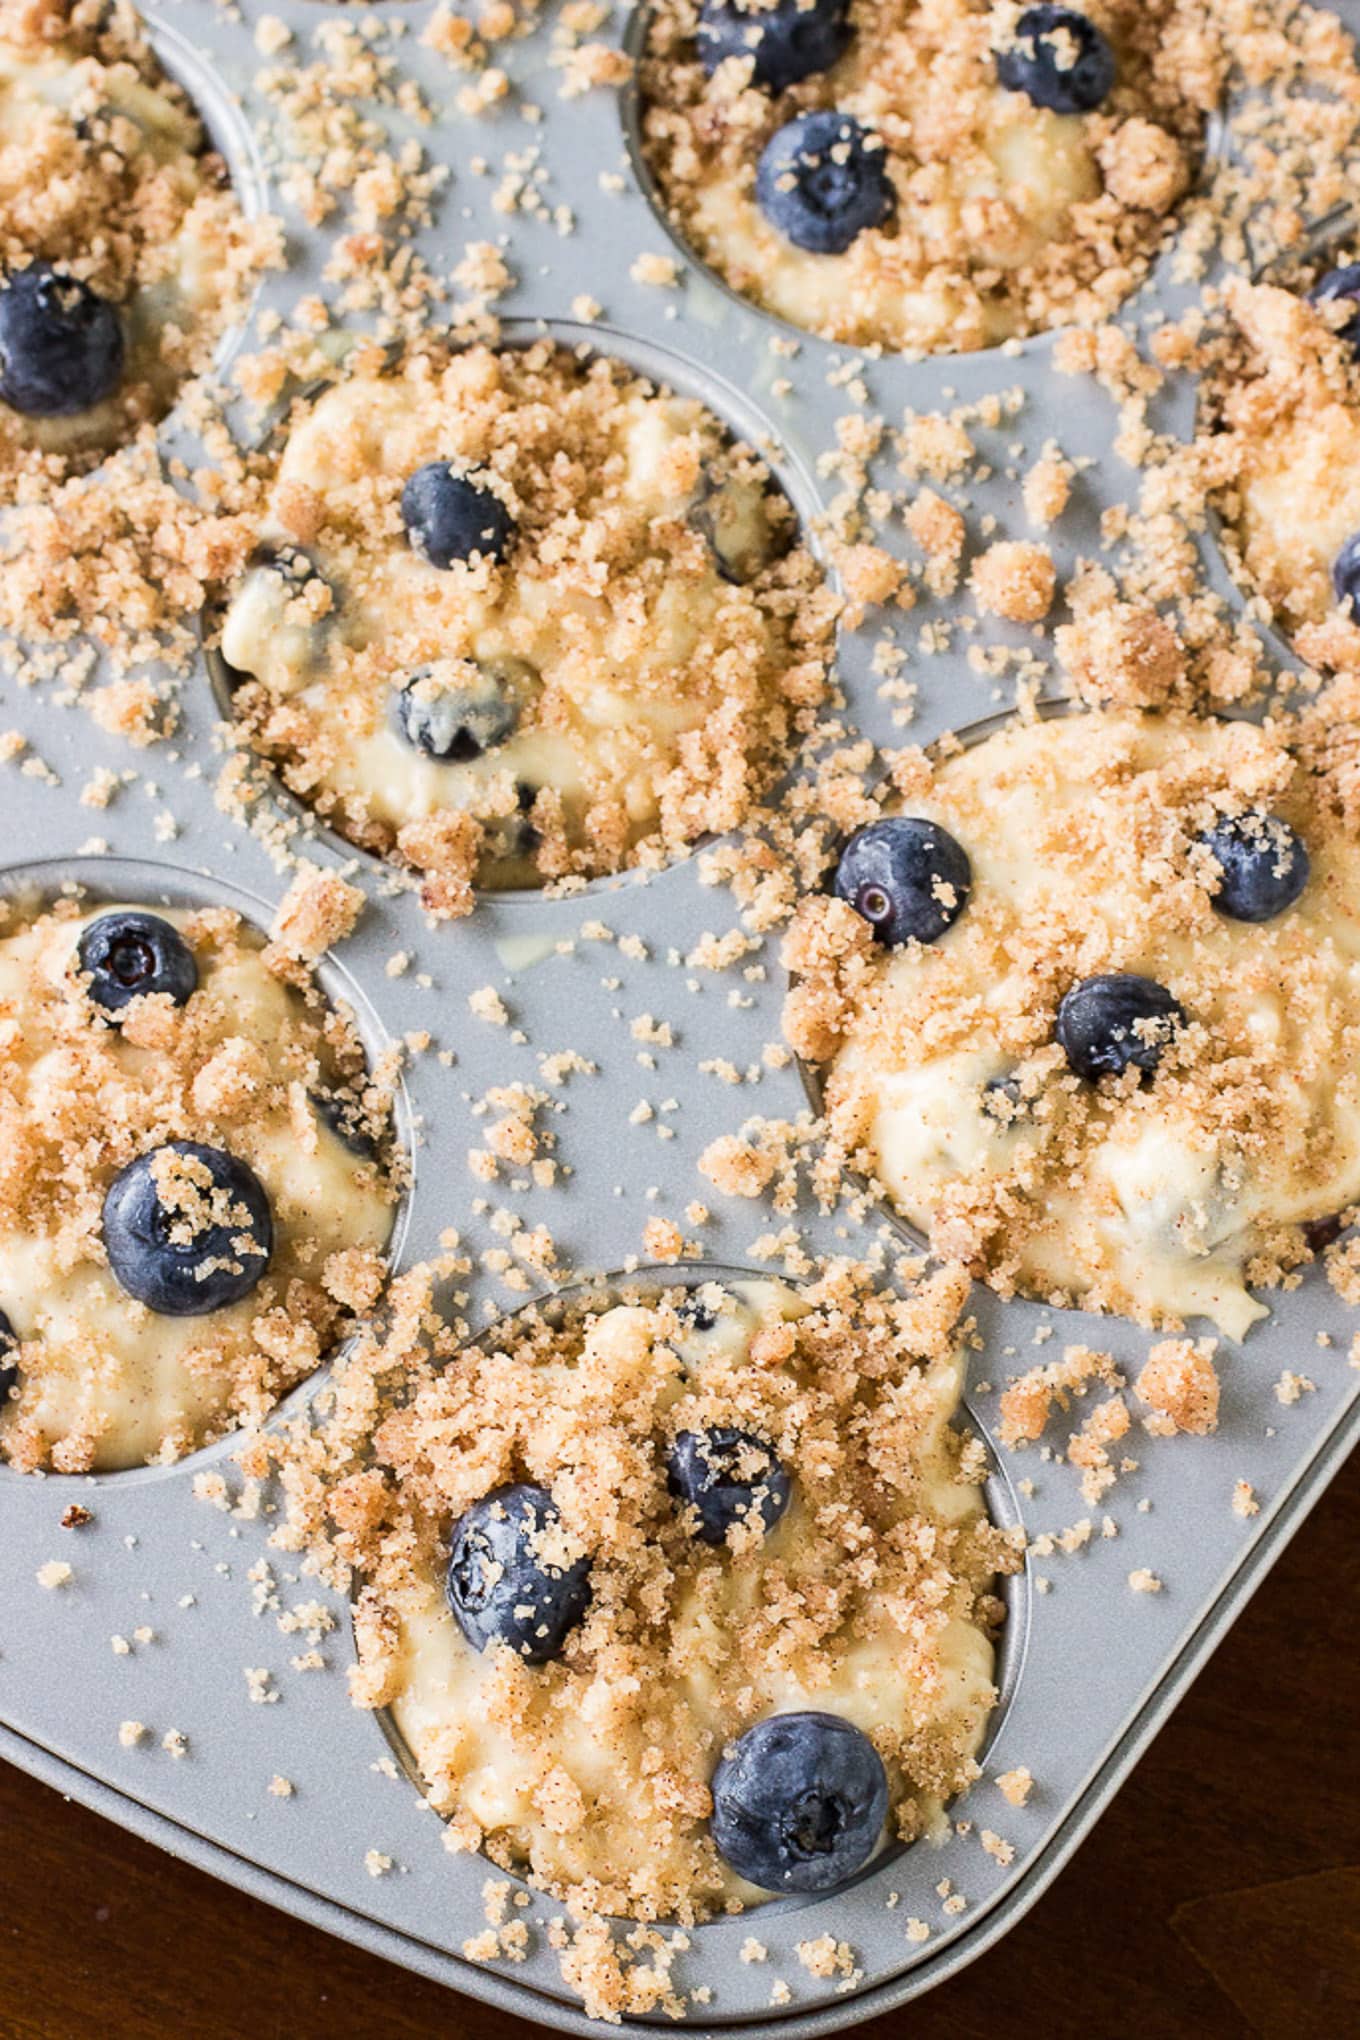 Blueberry muffin batter in a baking pan with blueberries on top and a crumb topping.